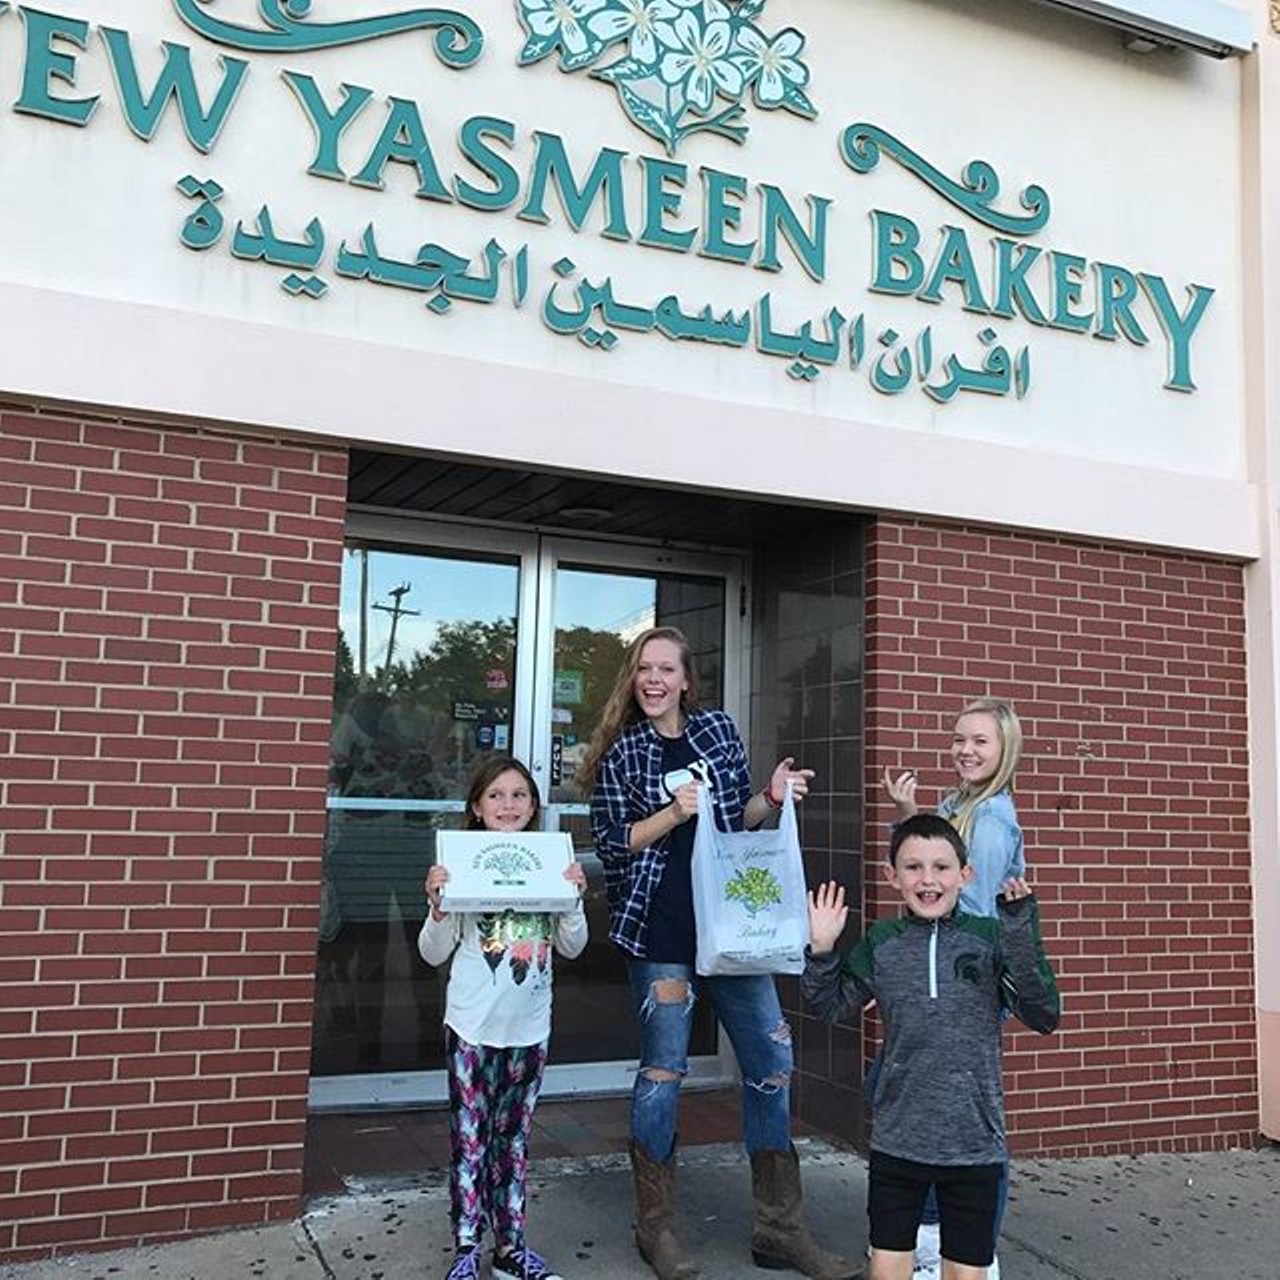 New Yasmeen Bakery
13900 W. Warren Ave., Dearborn; 313-582-6035
Three Siblini brothers brought their previous business in Lebanon to Dearborn as the New Yasmeen Bakery. According to the chef, everything is made on the premises, and that includes at least 30 different pastries. 
Photo via Instagram user @btwchilders